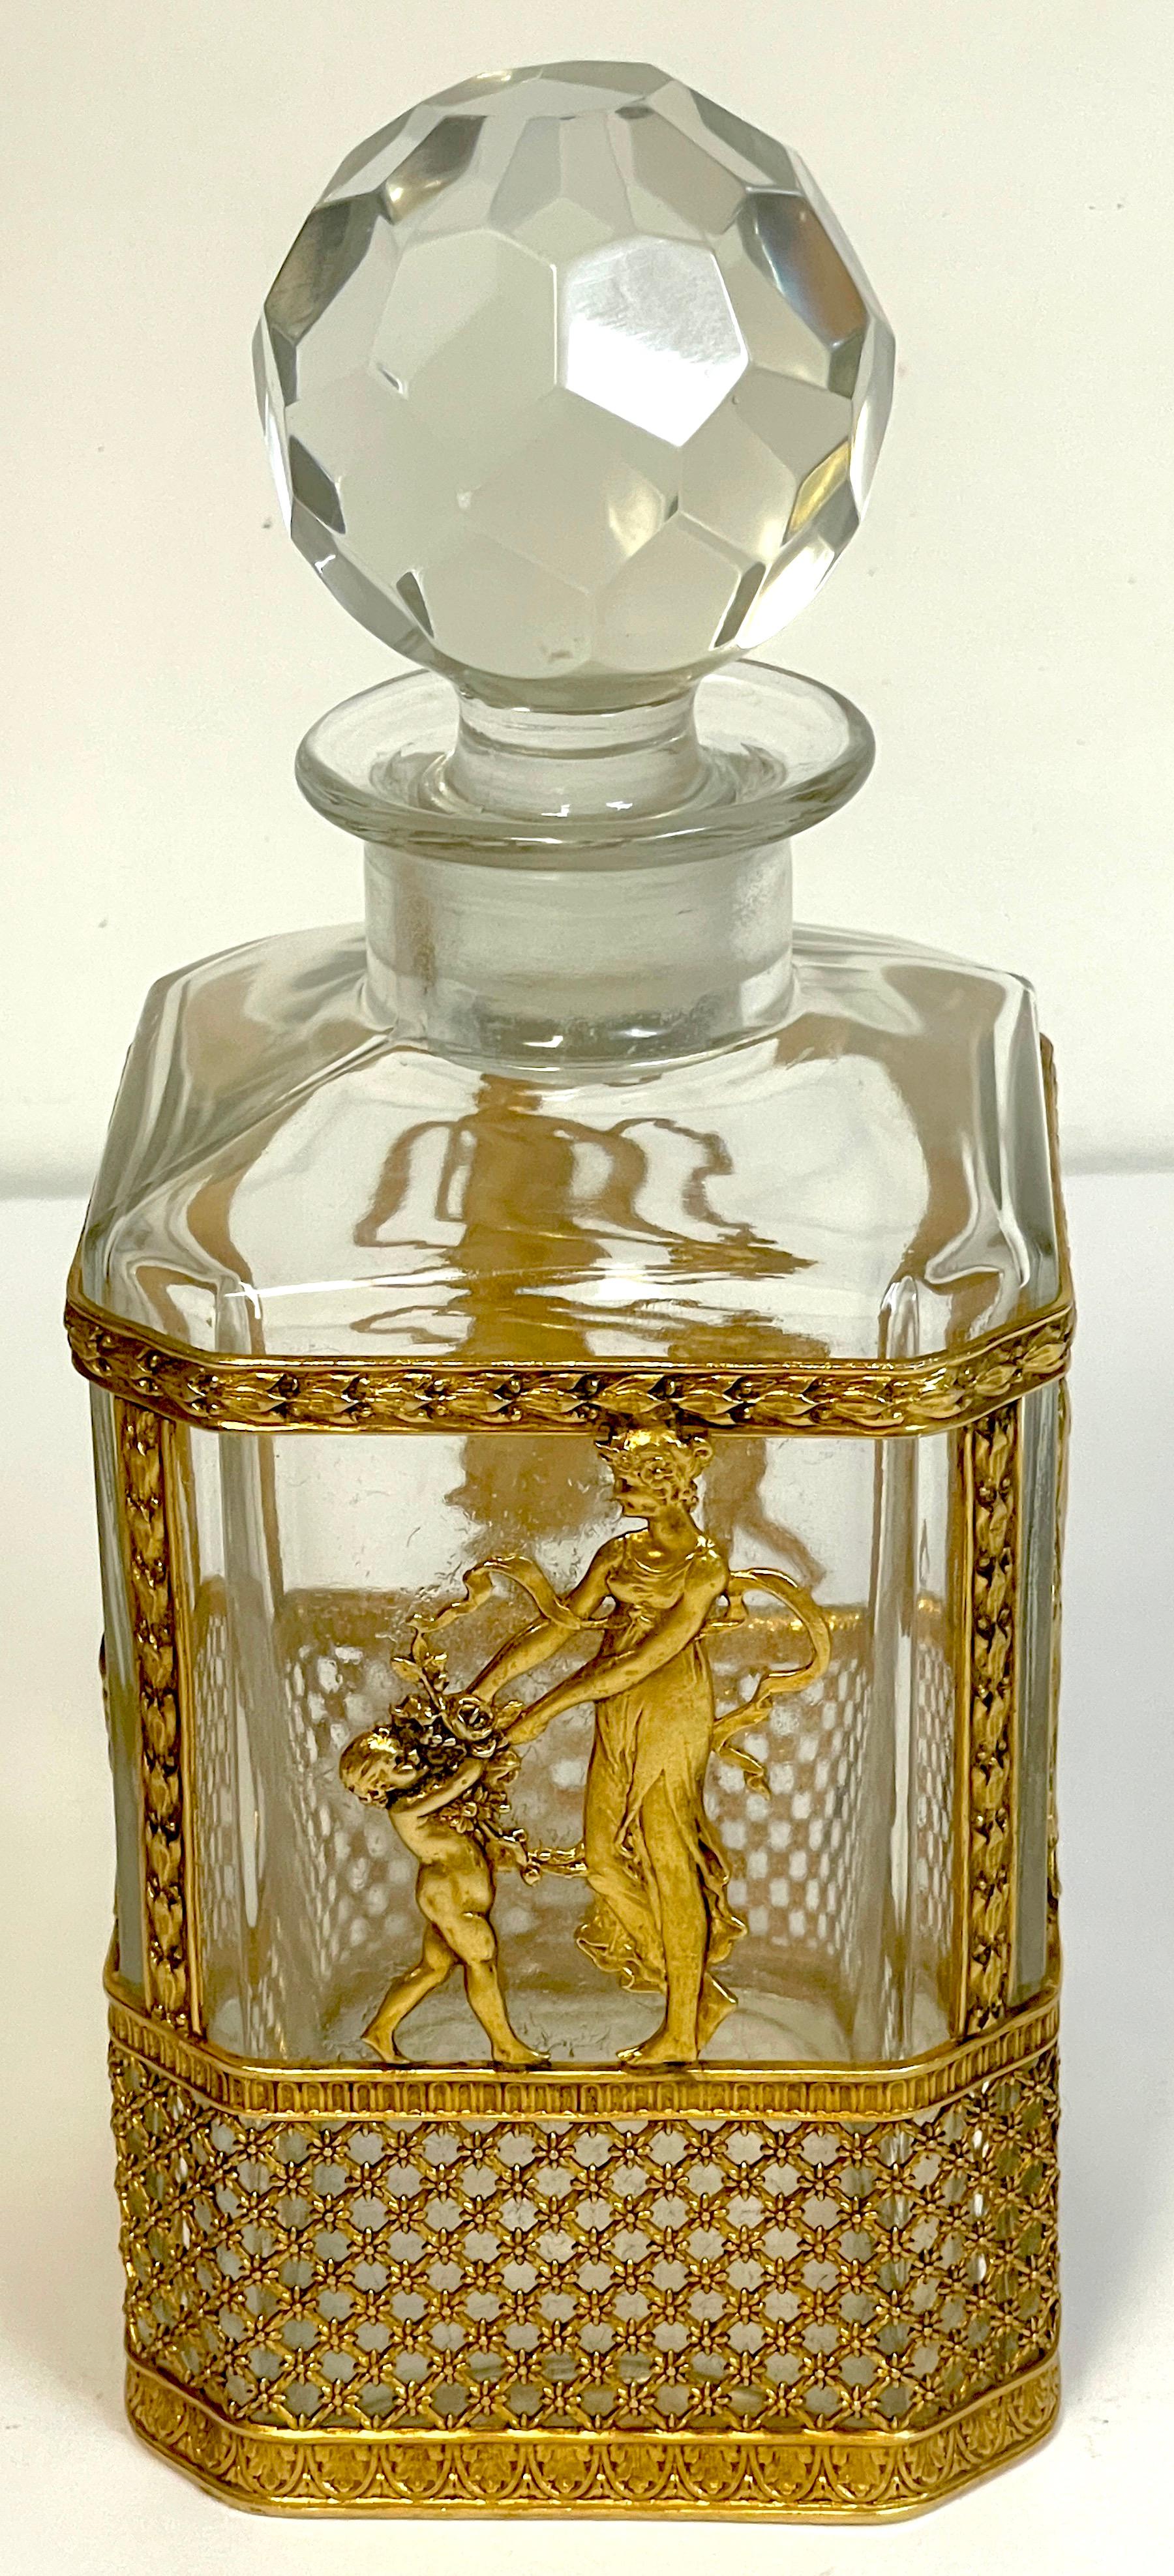 Empire Baccarat Style Ormolu Mounted Decanter For Sale 5